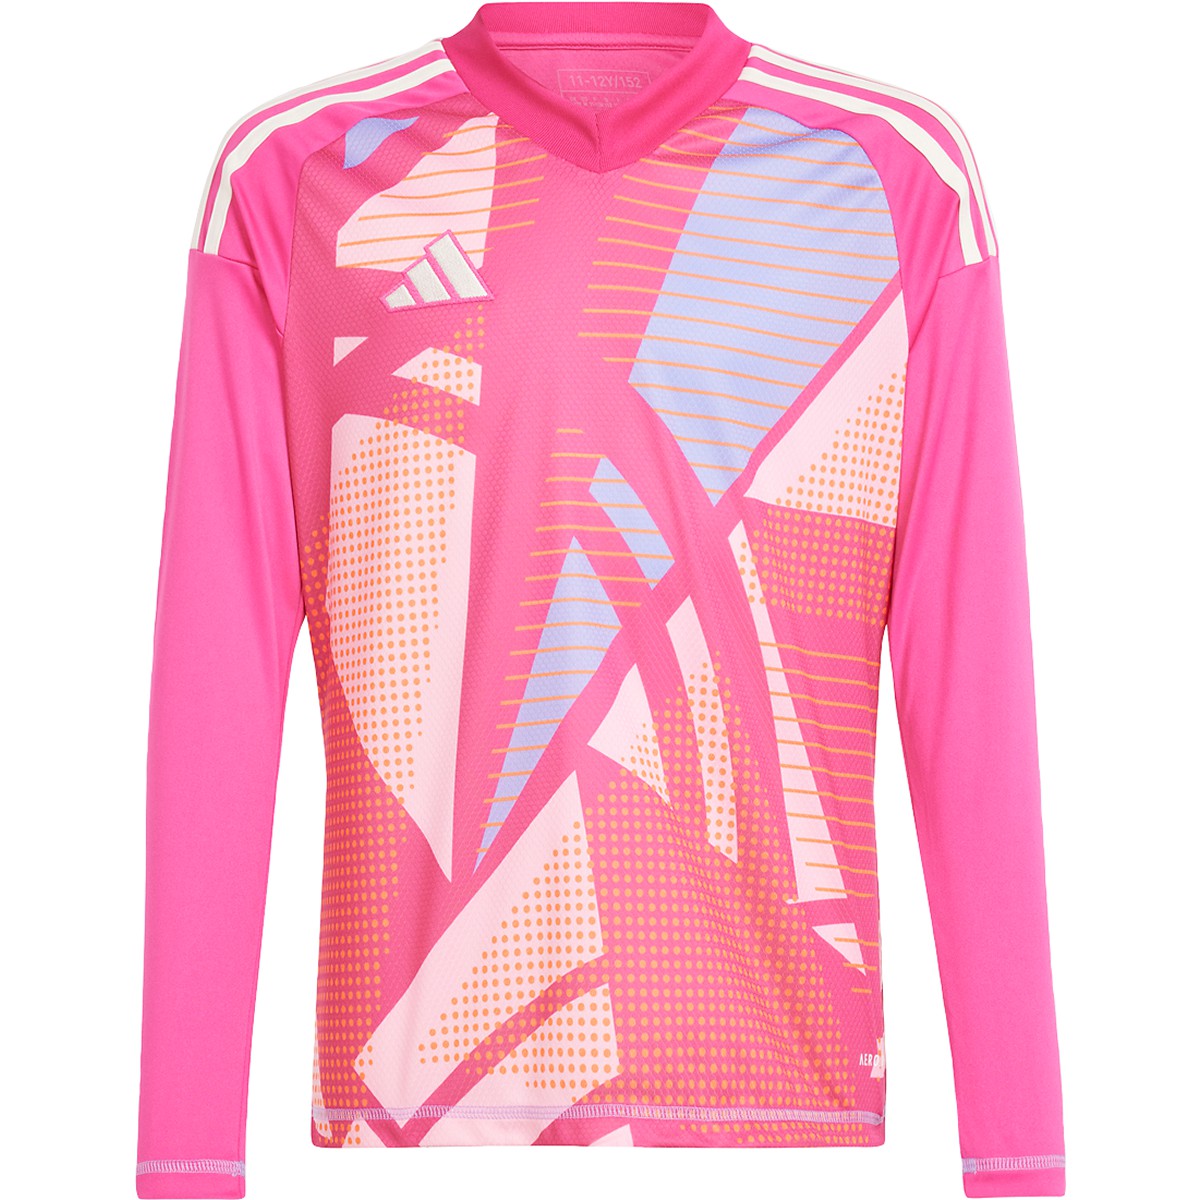 ADIDAS TIRO 24 YOUTH COMPETITION GOALKEEPER JERSEY